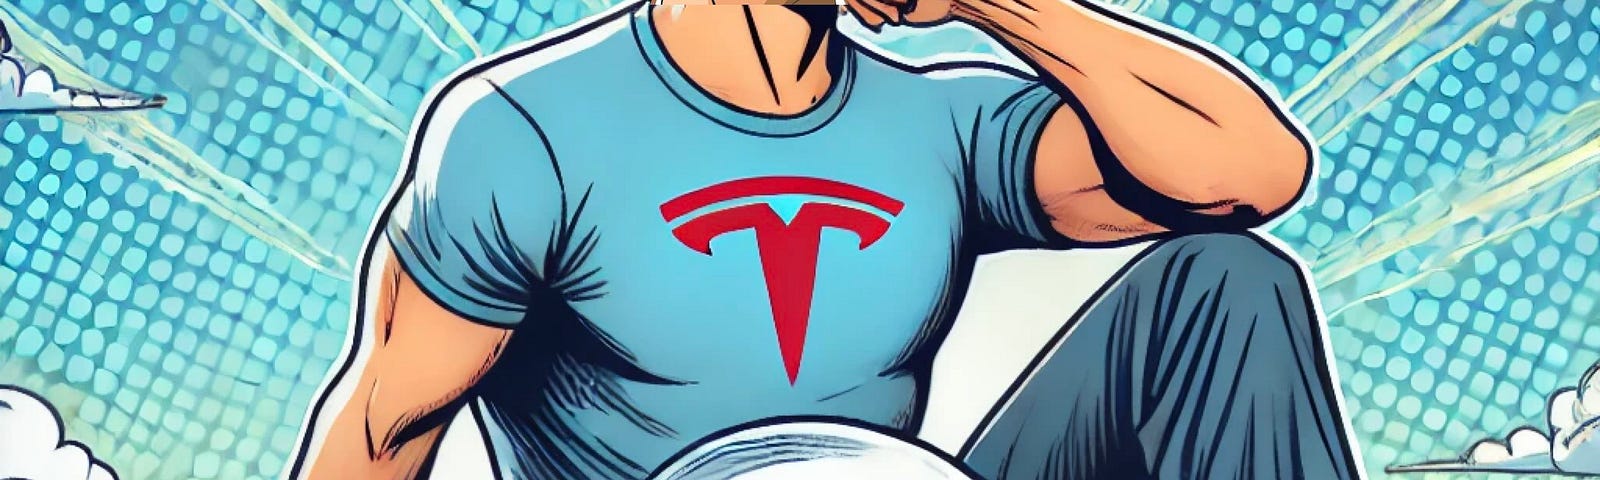 IMAGE: A cartoonish Elon Musk sitting on a cloud with the Tesla logo, wearing a t-shirt also with the Tesla logo